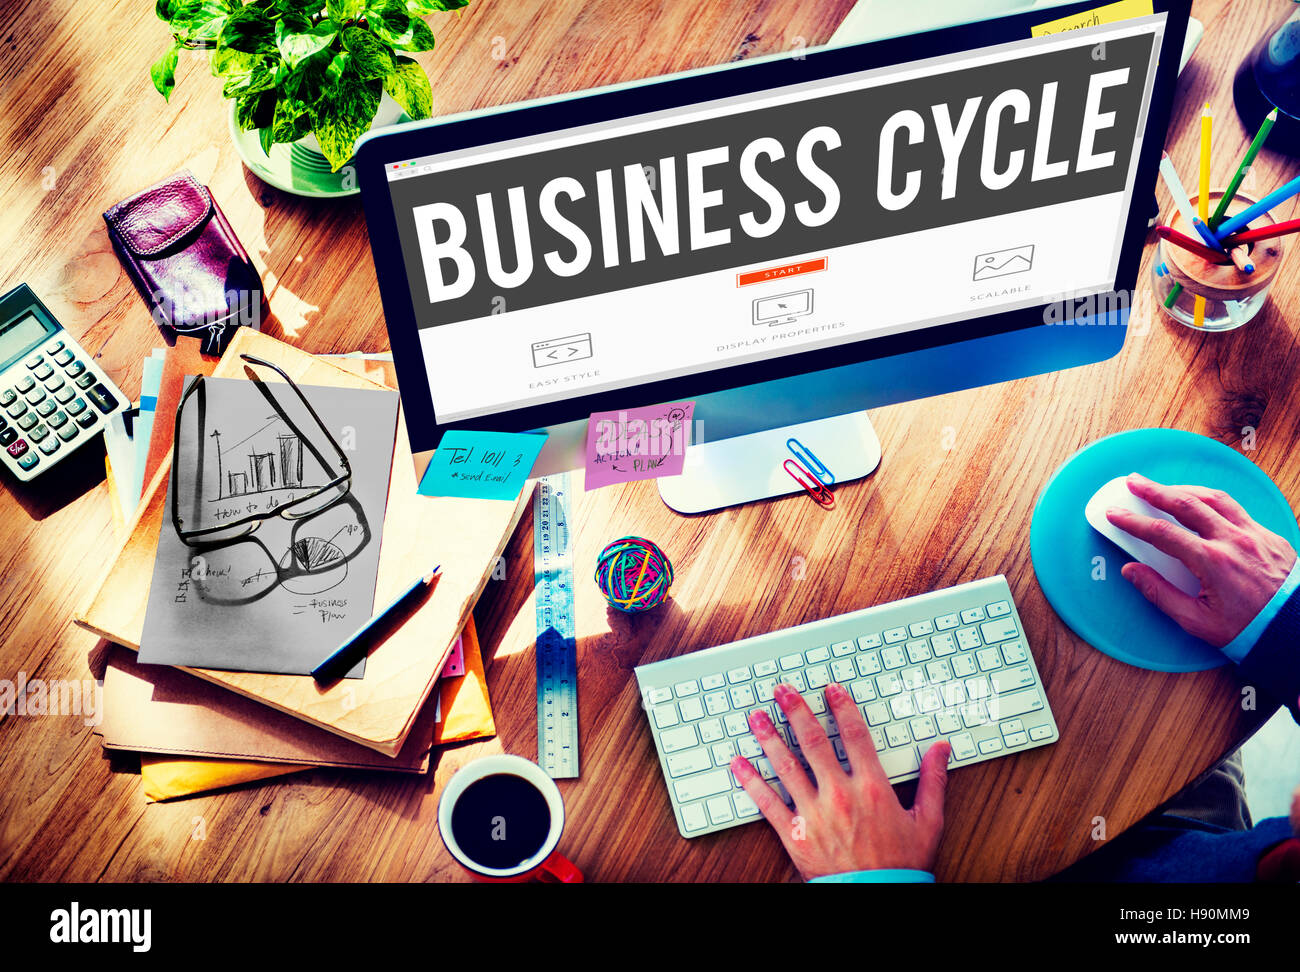 Business Cycle Income Profit Loss Recession Concept Stock Photo